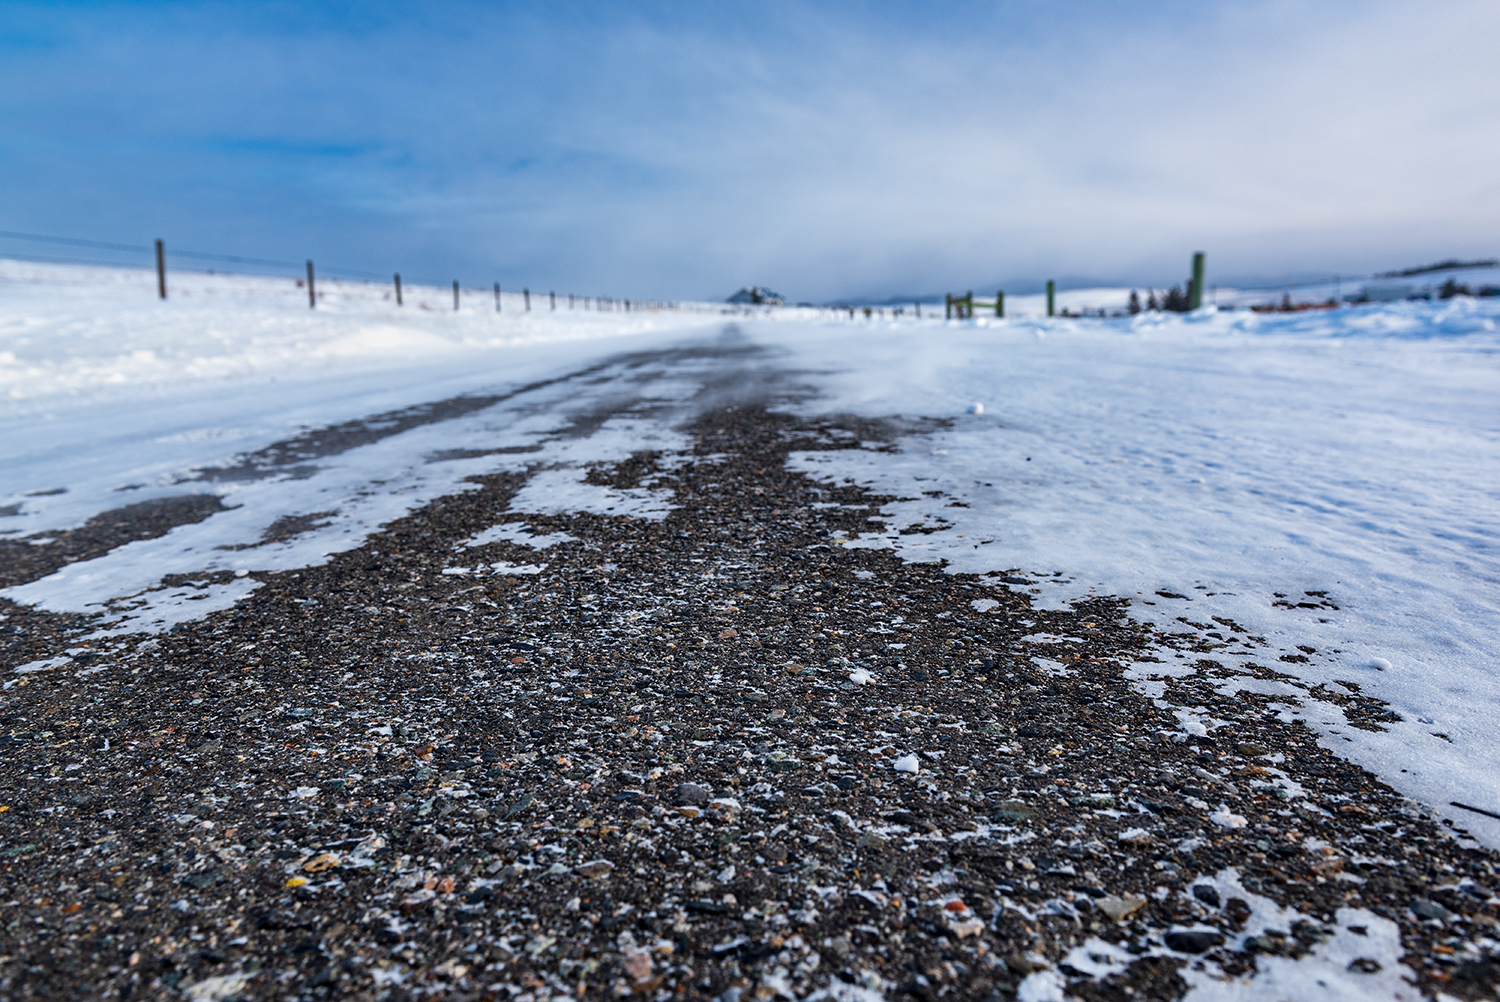 Kamloops Landscape with gravel road and sky with snow